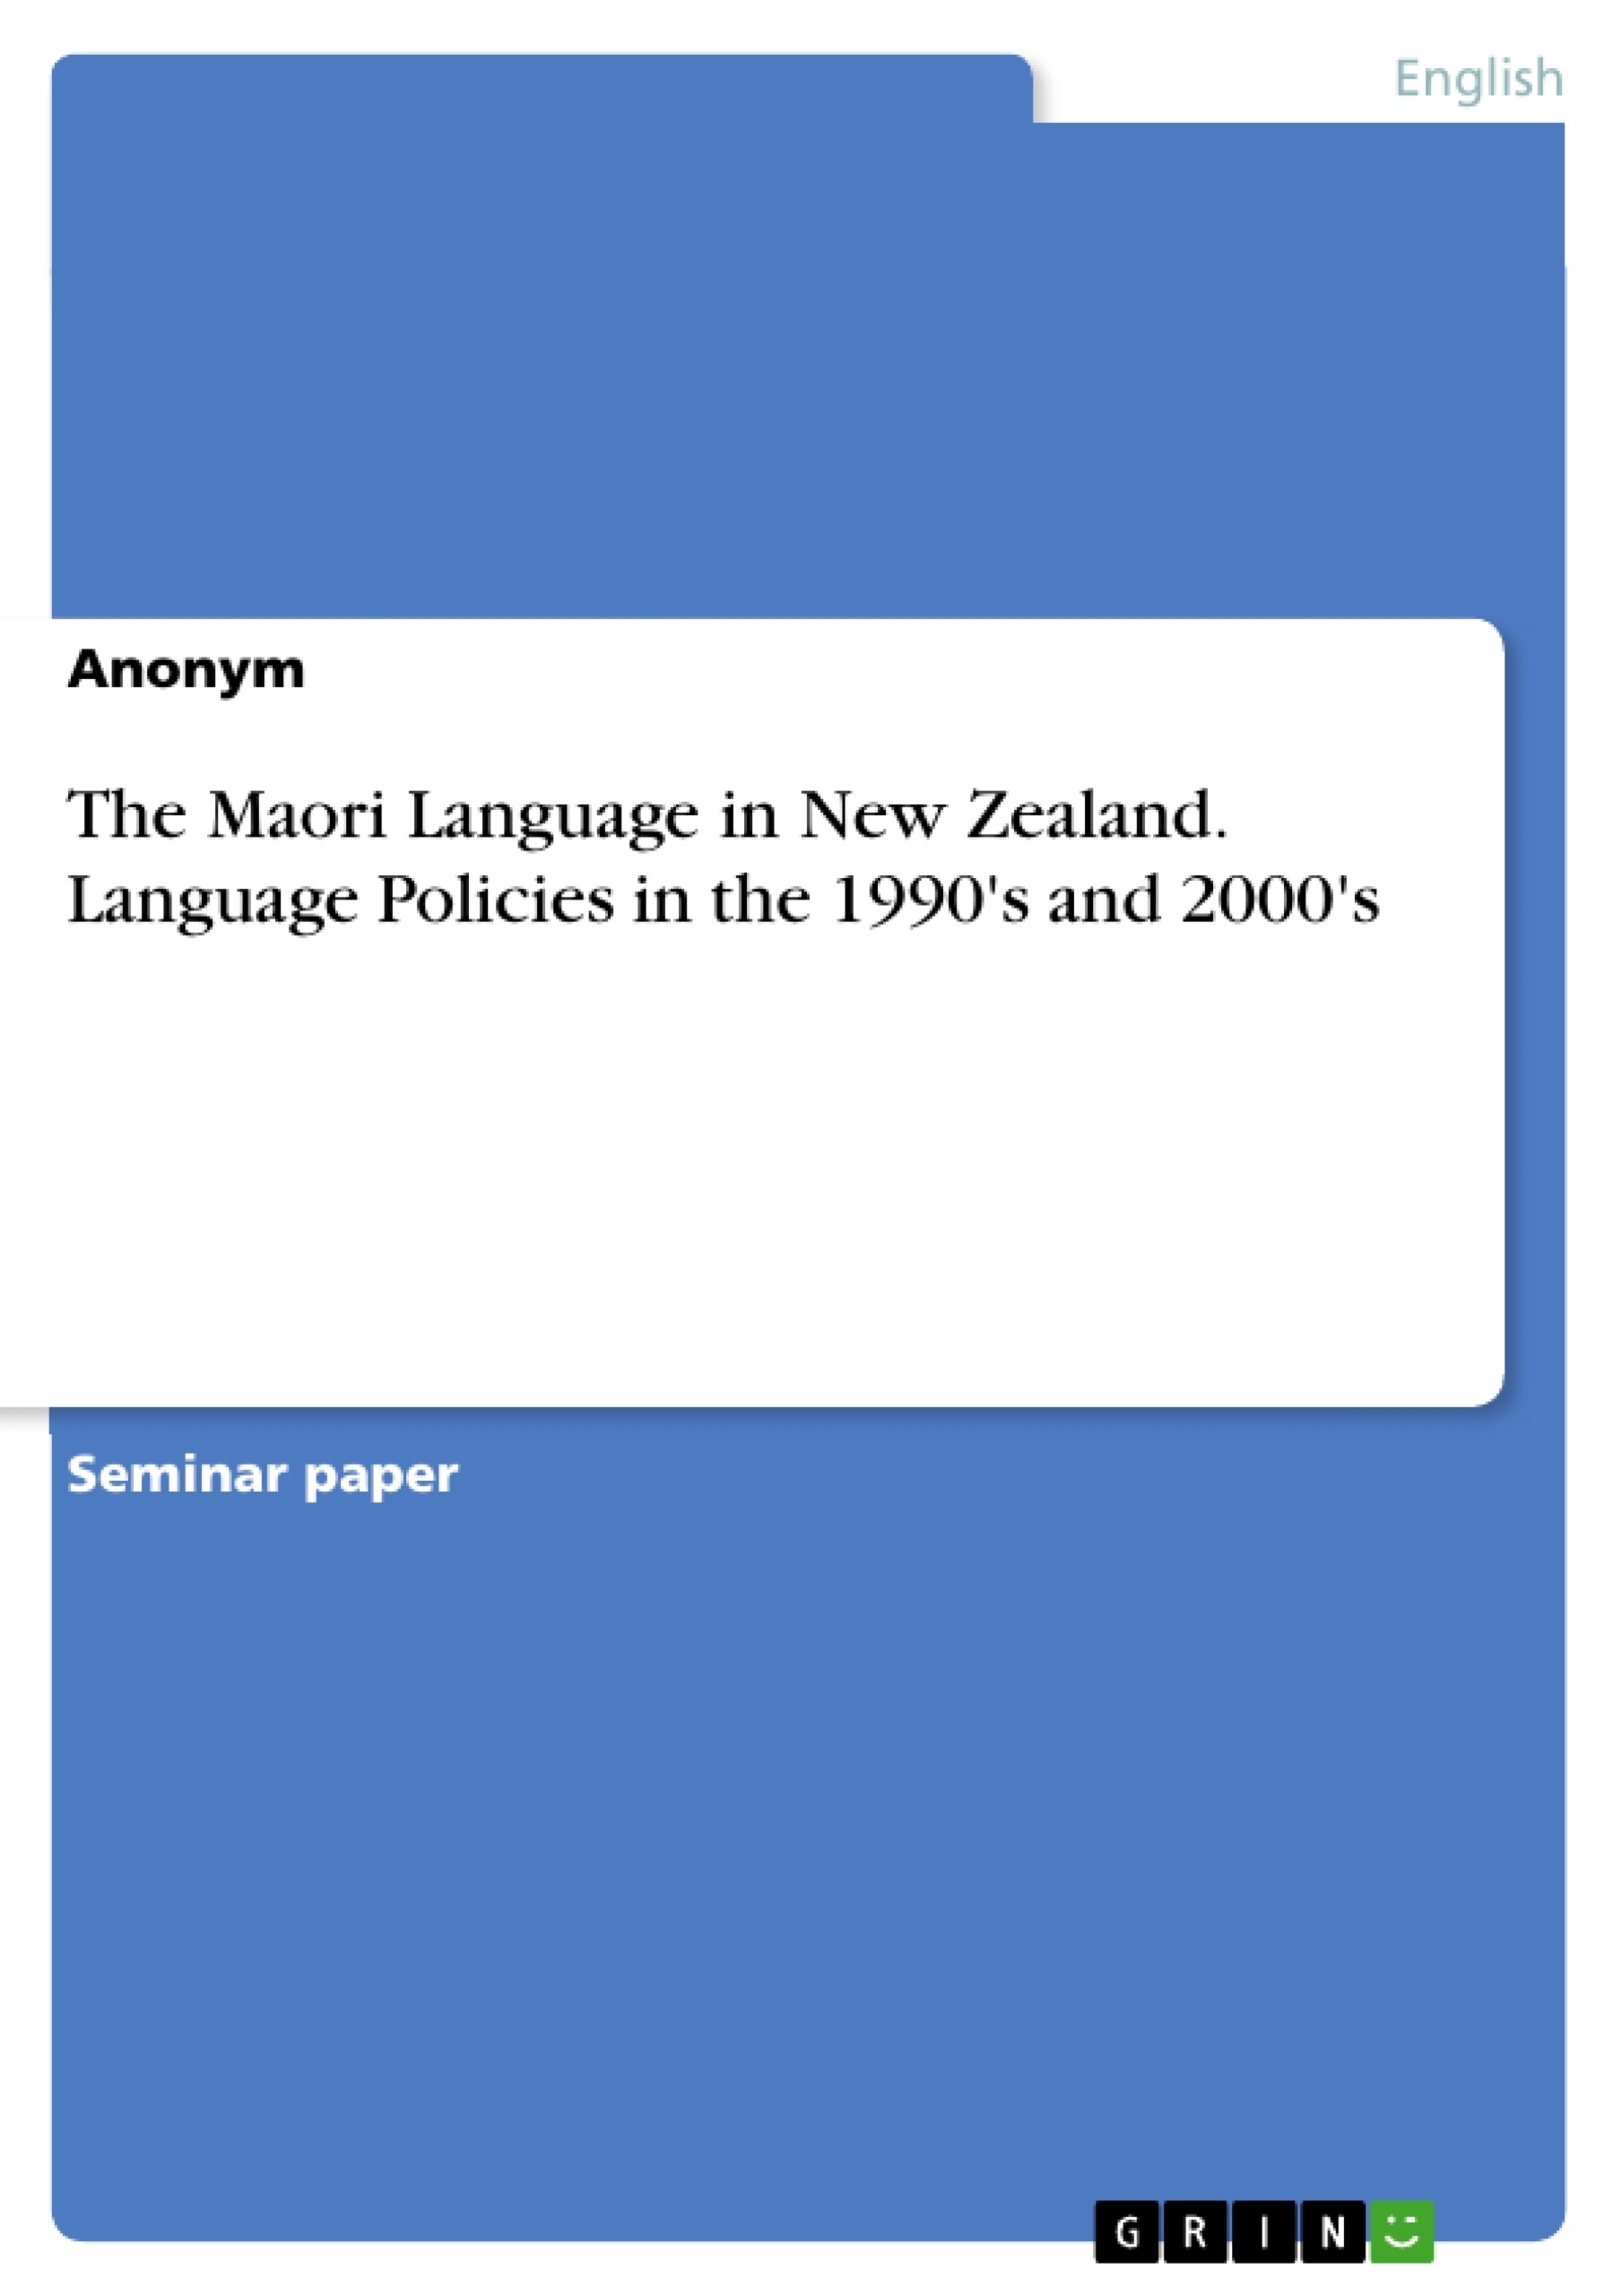 Titre: The Maori Language in New Zealand. Language Policies in the 1990's and 2000's